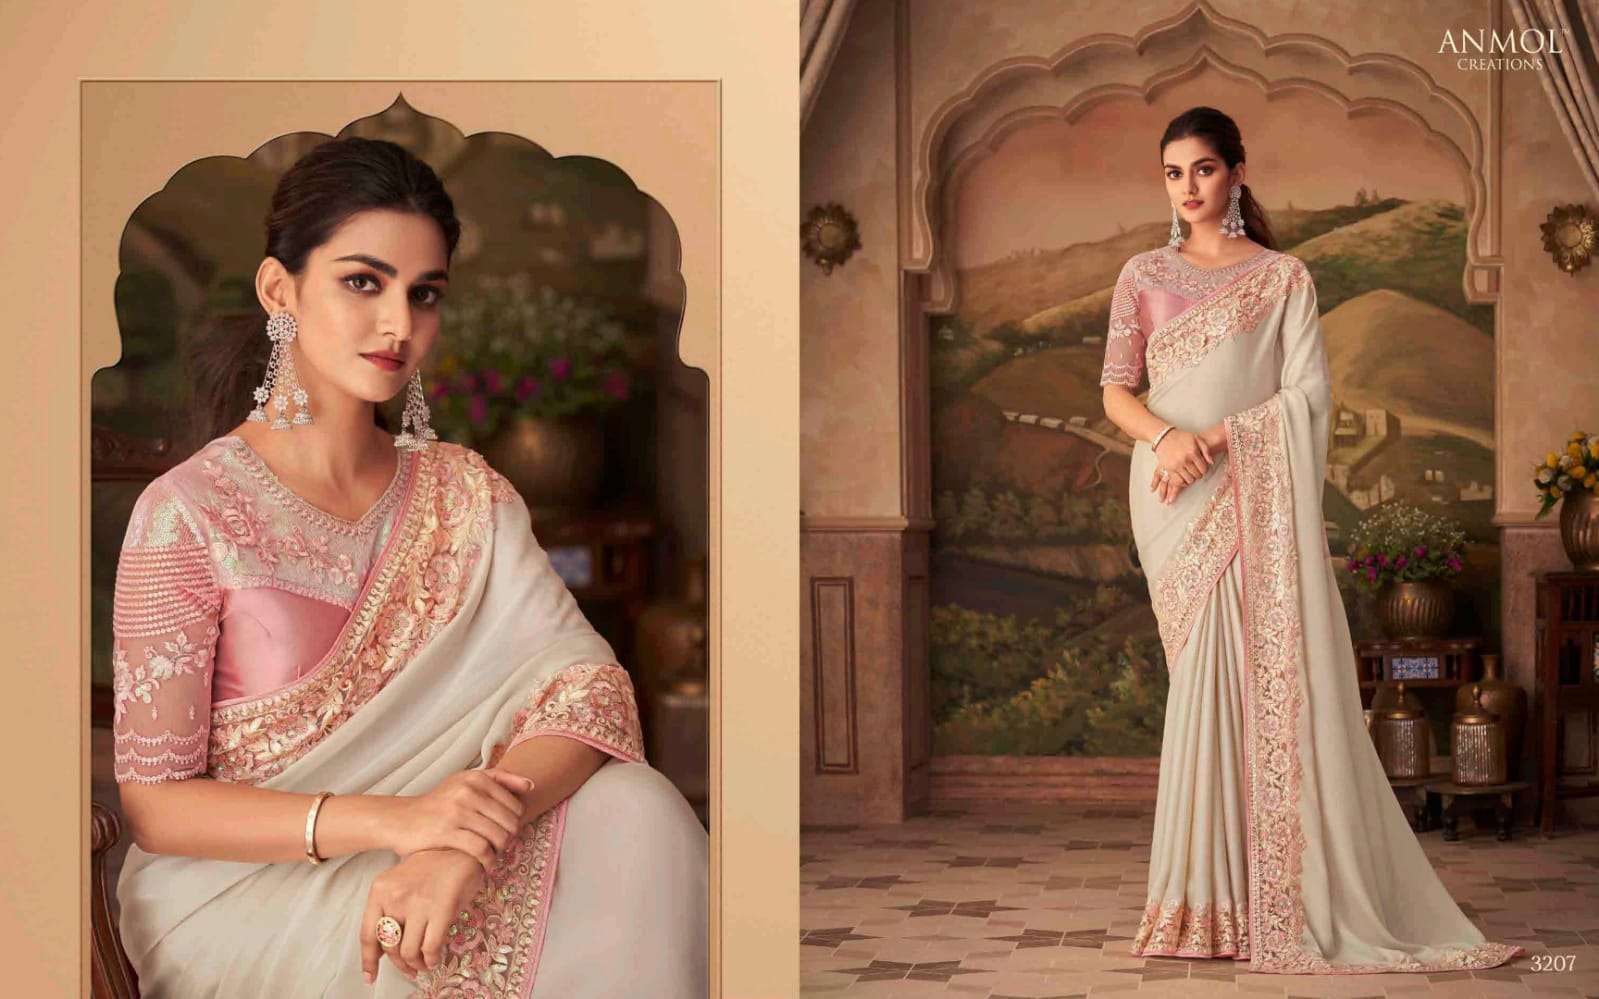 SHADES VOL-6 BY ANMOL CREATION 3201 TO 3216 SERIES INDIAN TRADITIONAL WEAR COLLECTION BEAUTIFUL STYLISH FANCY COLORFUL PARTY WEAR & OCCASIONAL WEAR GEORGETTE/SILK SAREES AT WHOLESALE PRICE